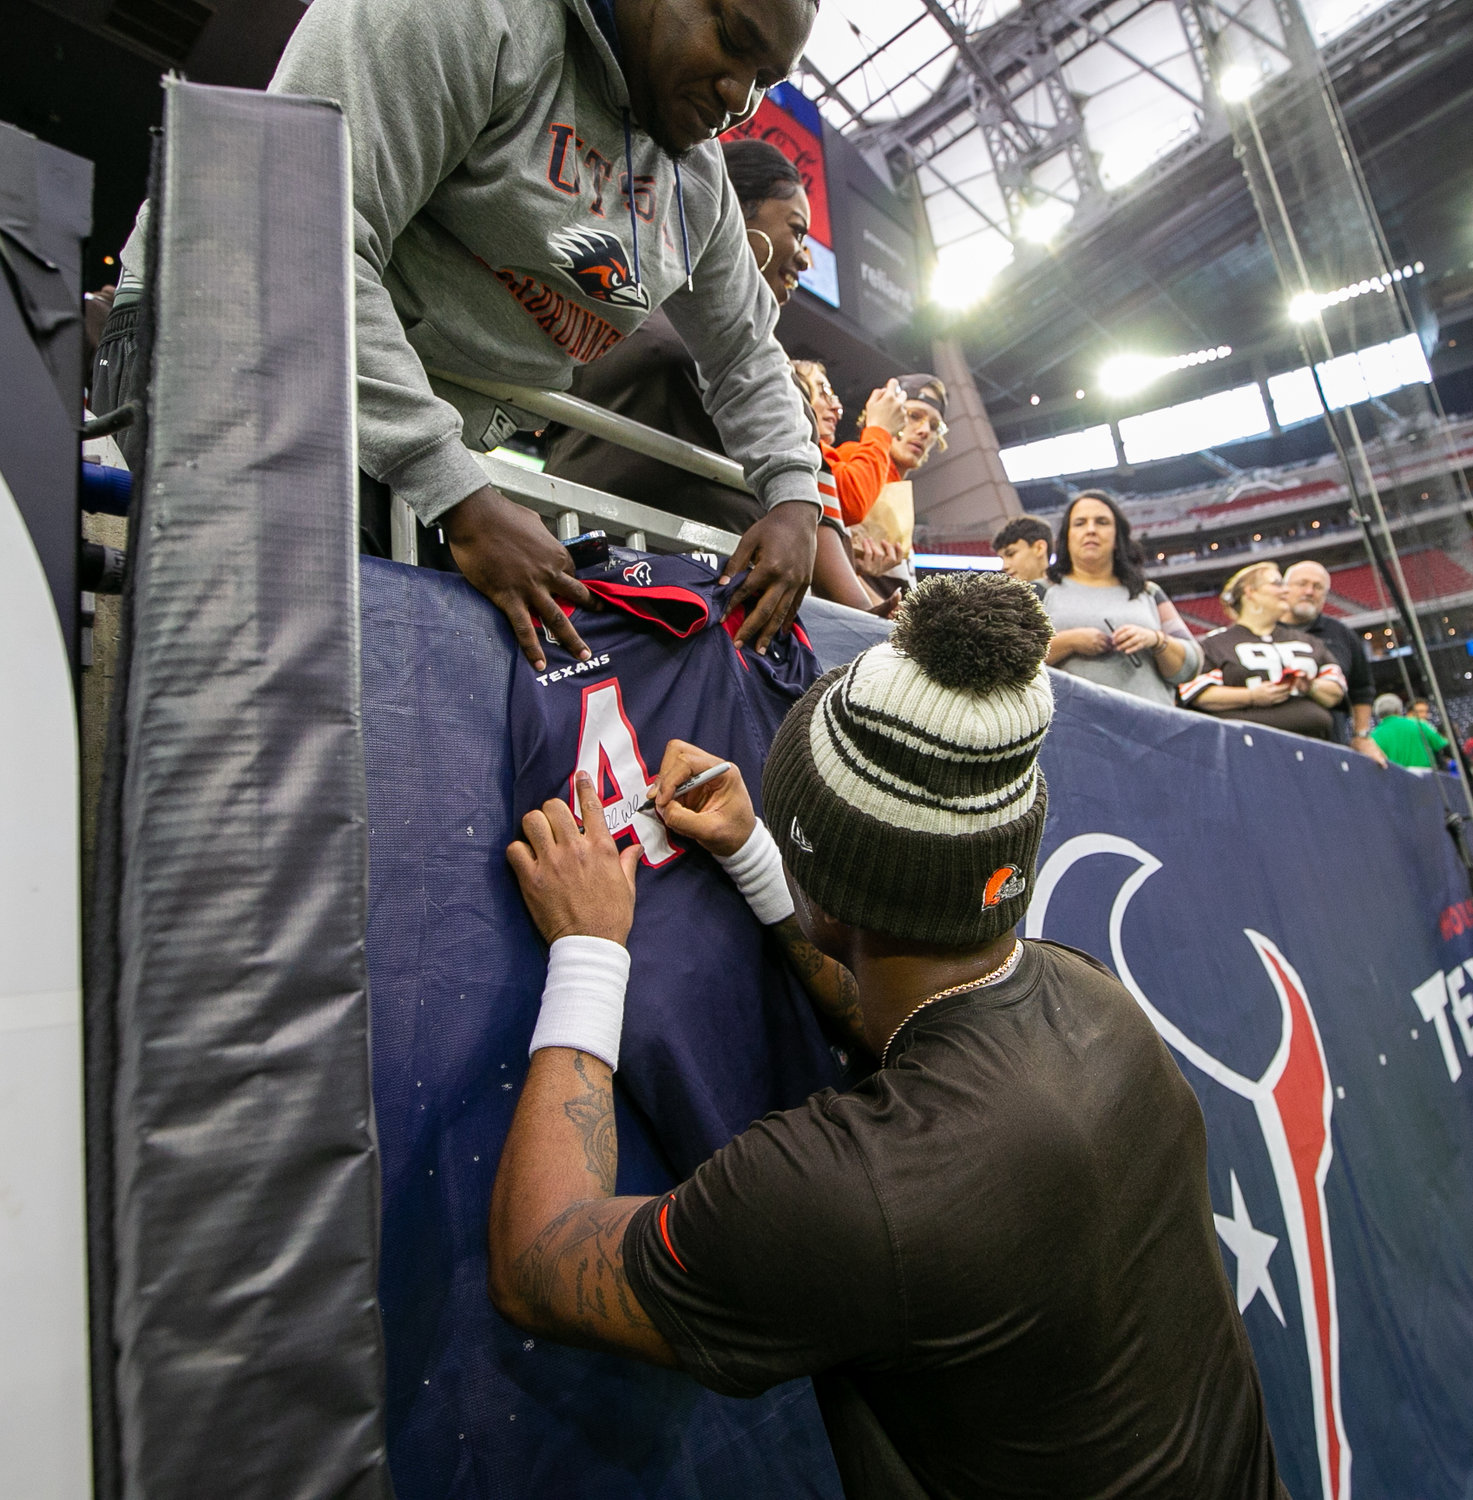 Former Houston Texans and current Cleveland Browns quarterback Deshaun Watson signs autographs before an NFL game on Dec. 4, 2022, in Houston. The game marks the controversial quarterback’s return to Houston and first game back after an 11-game suspension for allegations of sexual misconduct during his tenure with the Texans.